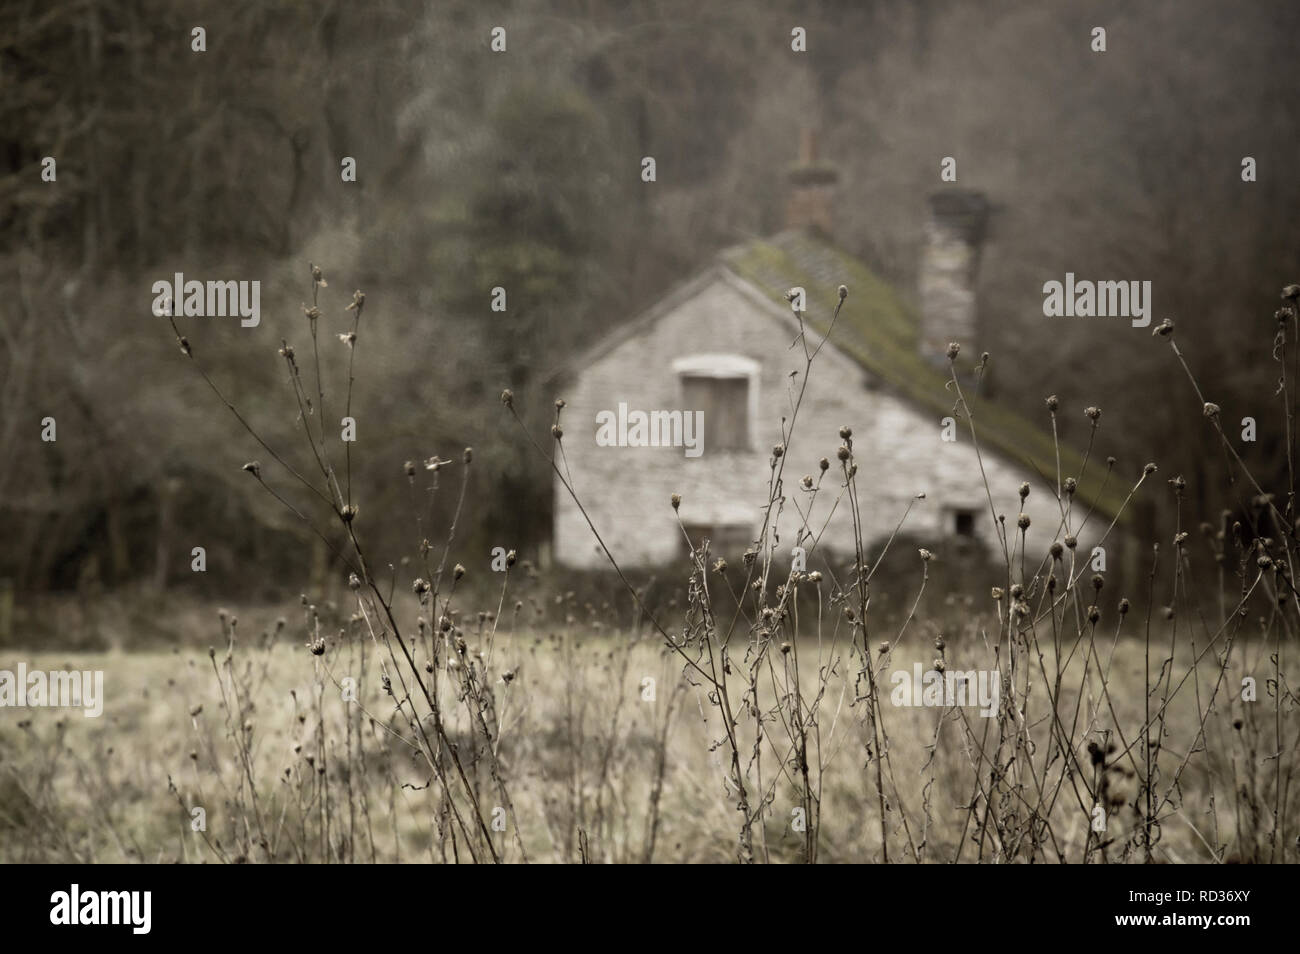 A close up of dead plants in winter with a ruined old building blurred in the background. With a muted edit. Knapp and Papermill, Worcestershire, UK. Stock Photo